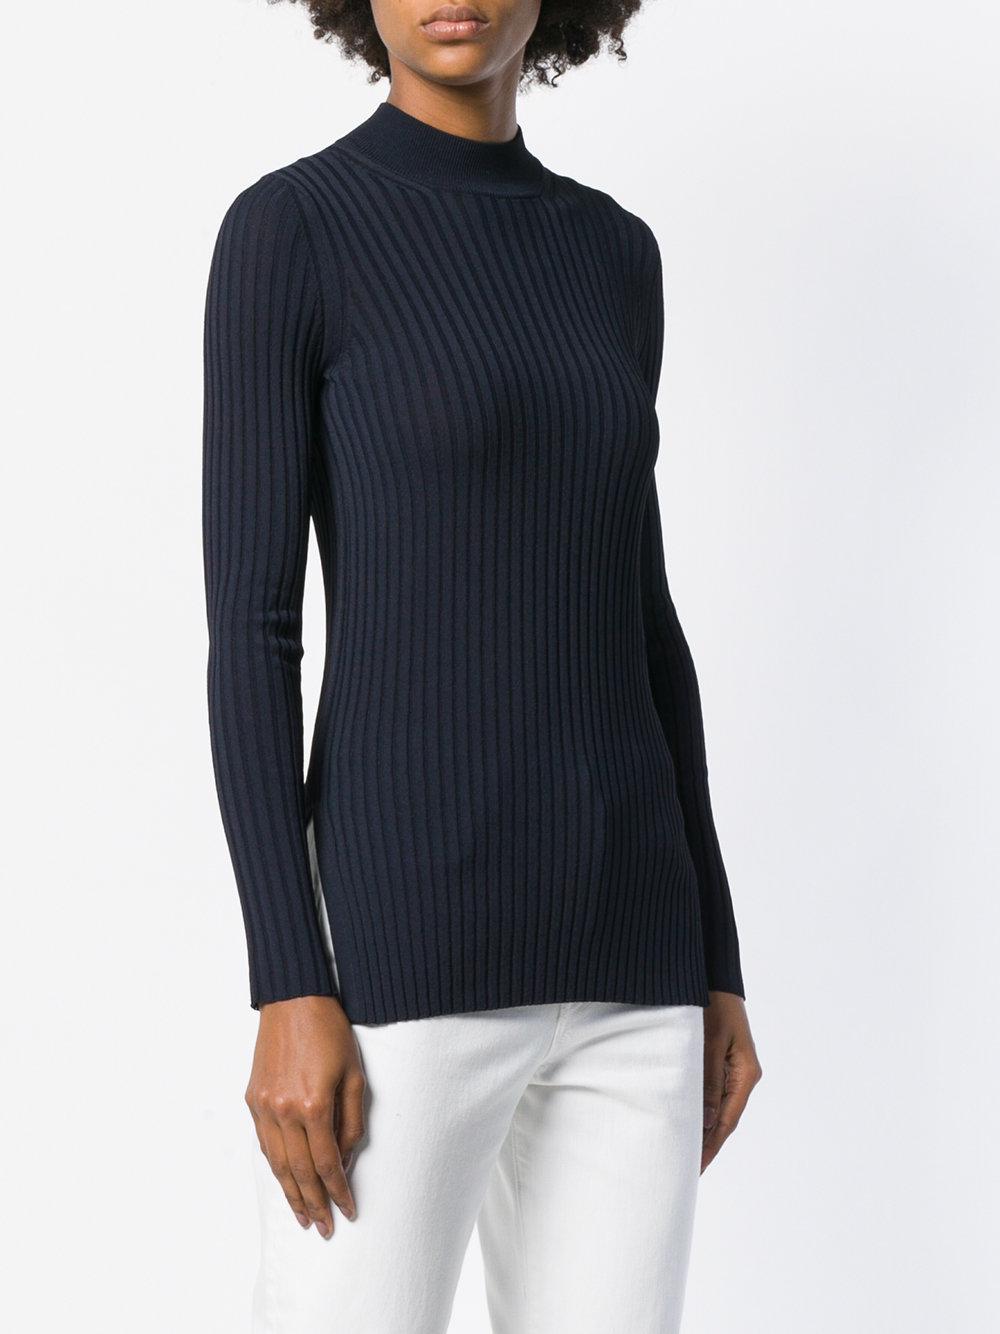 Download Max Mara Synthetic Ribbed Side Slit Mock Neck Sweater in ...